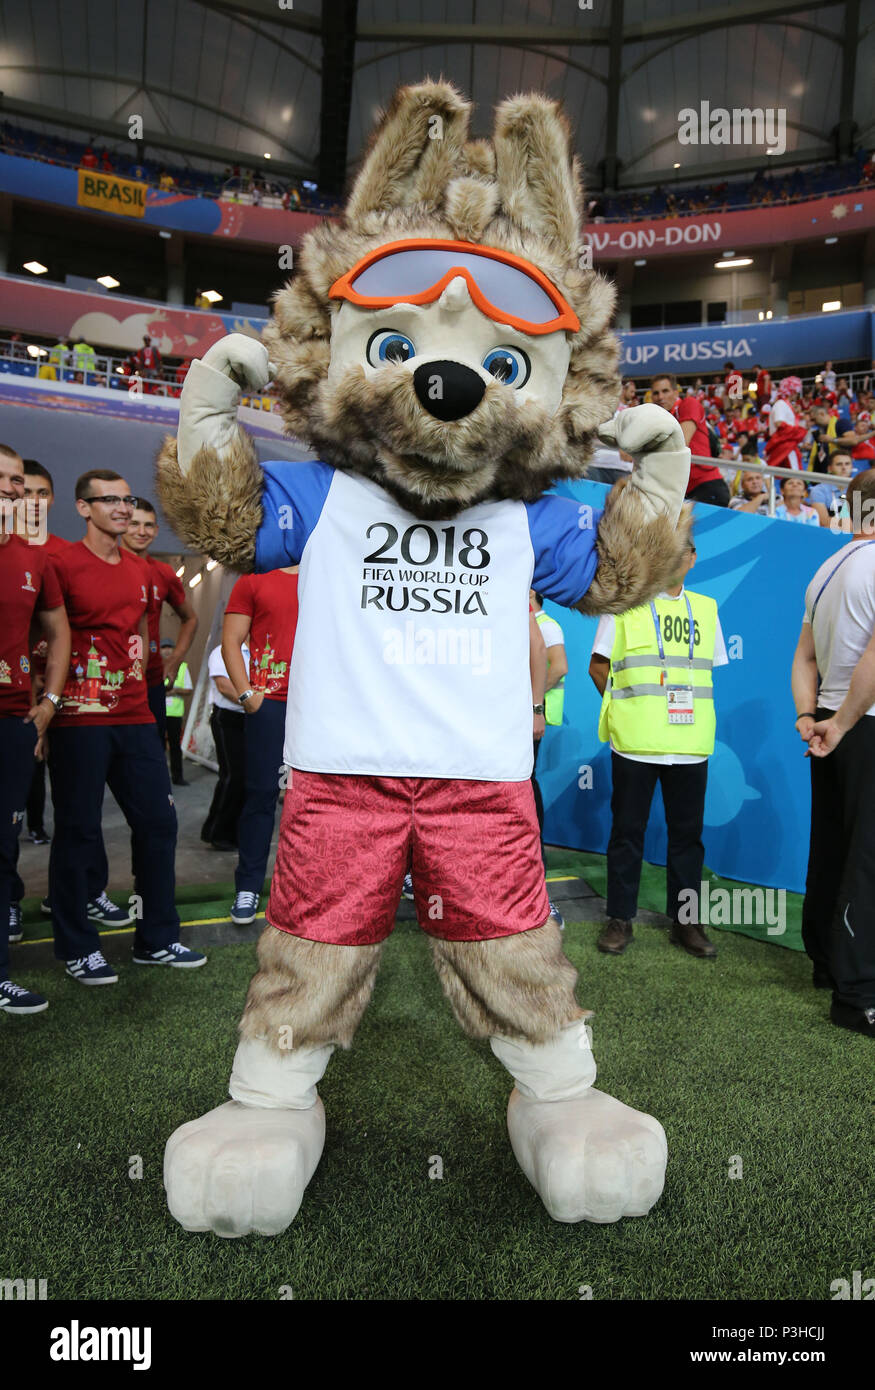 Rostov-on-Don, Russia. 17th June, 2018. Zabivaka, Official mascot Football/Soccer : FIFA World Cup Russia 2018 Group E match between Brazil 1-1 Switzerland at Rostov Arena in Rostov-on-Don, Russia . Credit: AFLO/Alamy Live News Stock Photo